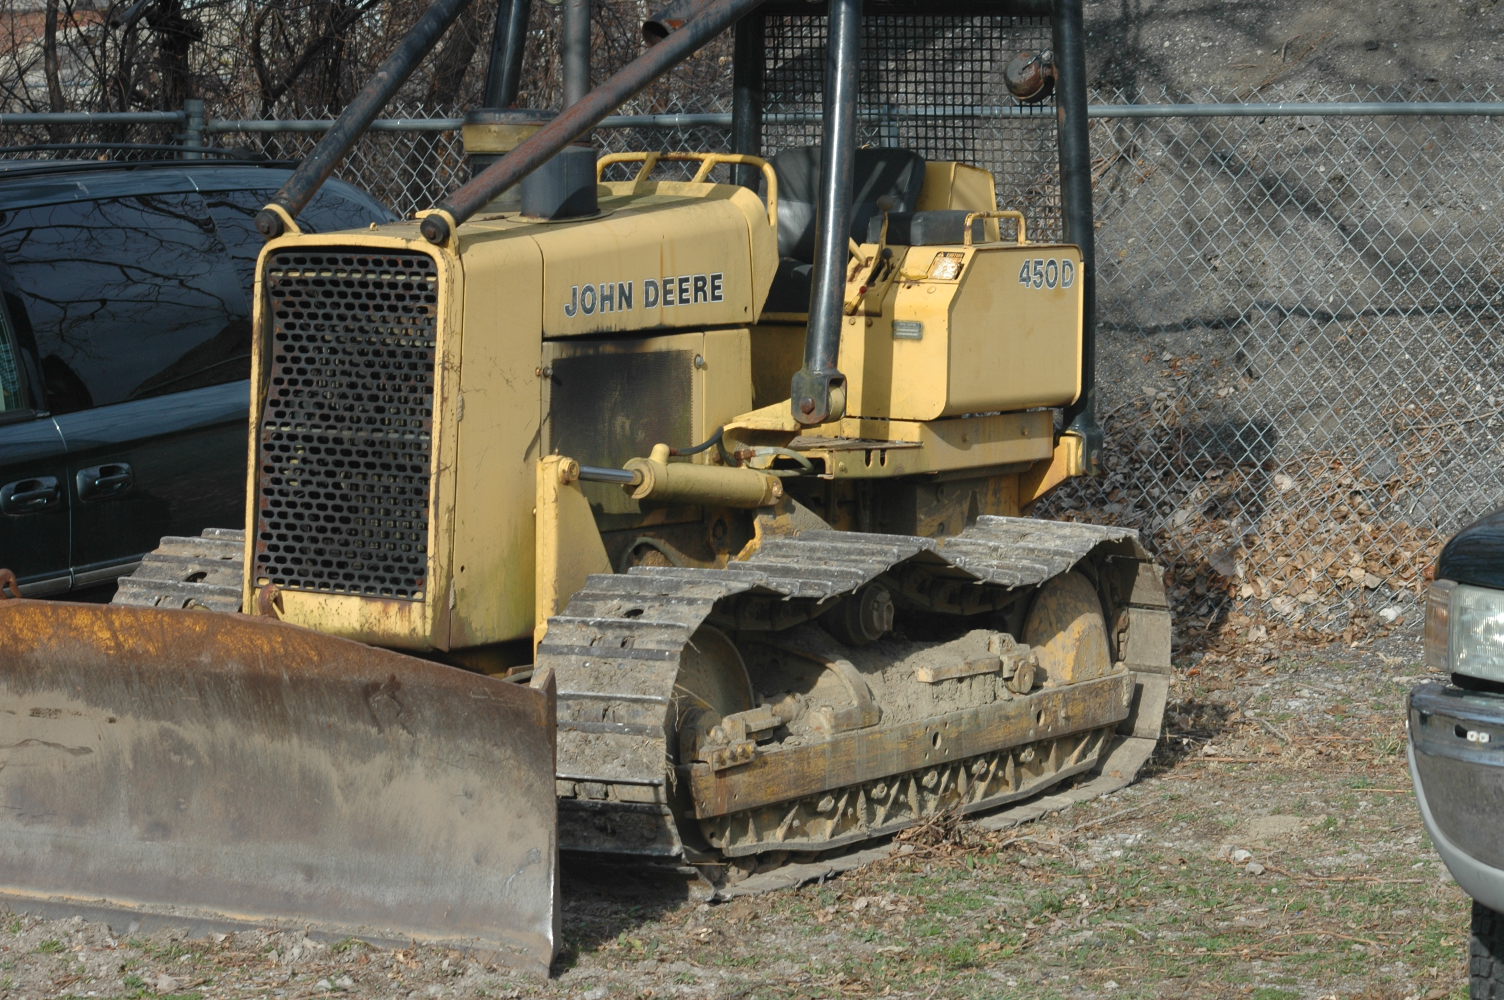 Grossman Auction Pictures From March 1, 2016 - 952 E 72 Street Cleveland Ohio 44103